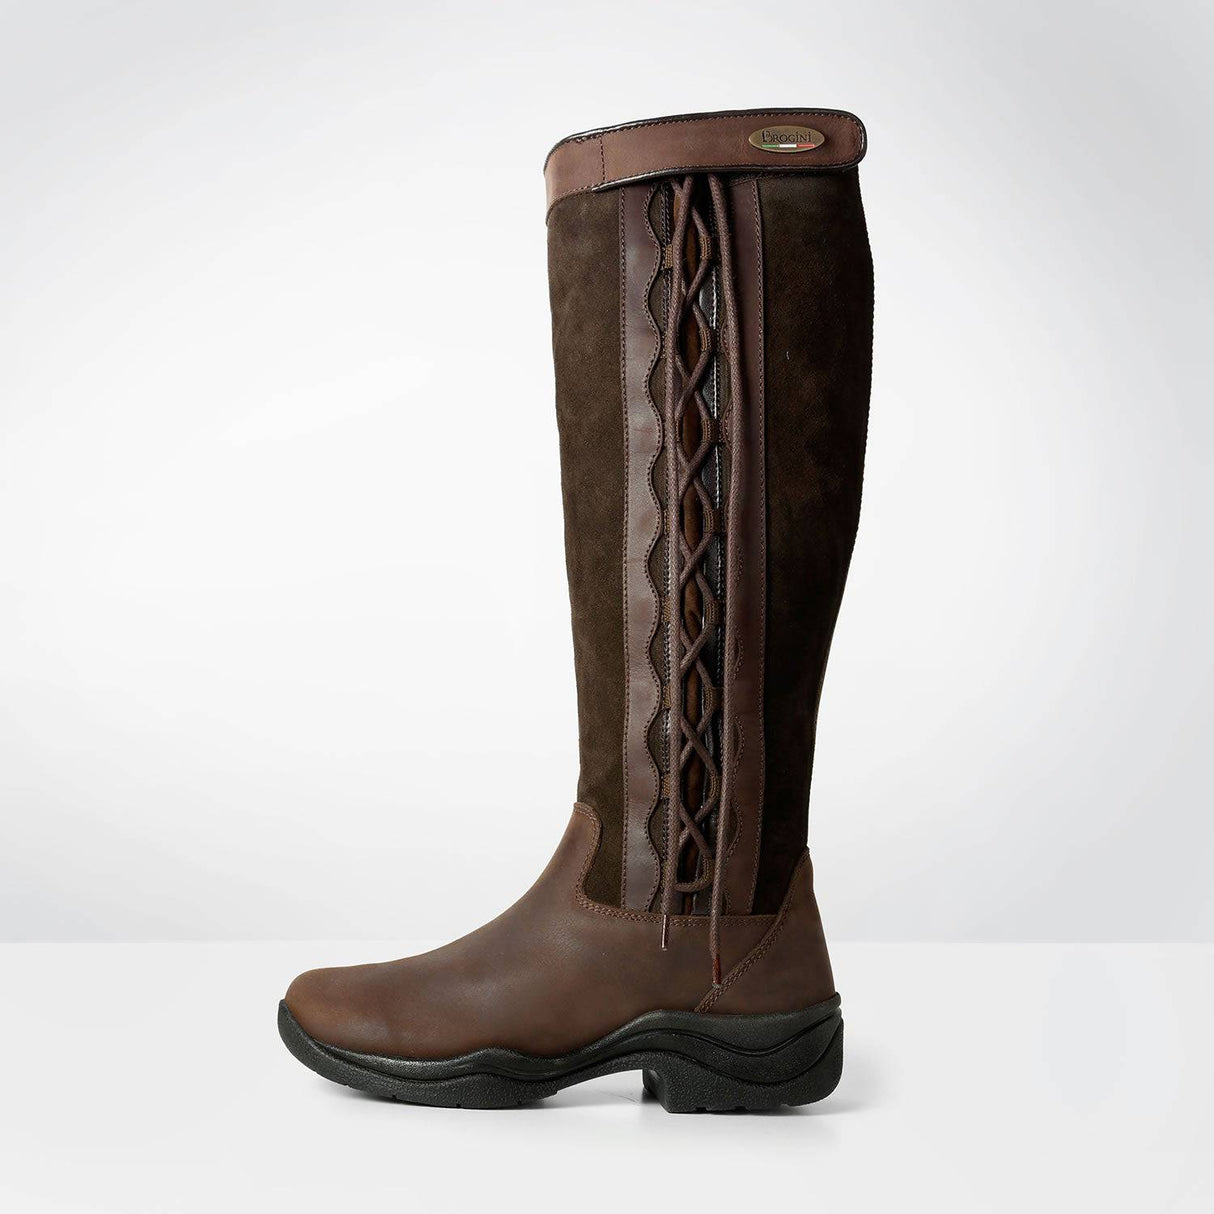 Brogini Winchester Country Boots - Standard Country Boots 41 Eu / 7 Uk Barnstaple Equestrian Supplies